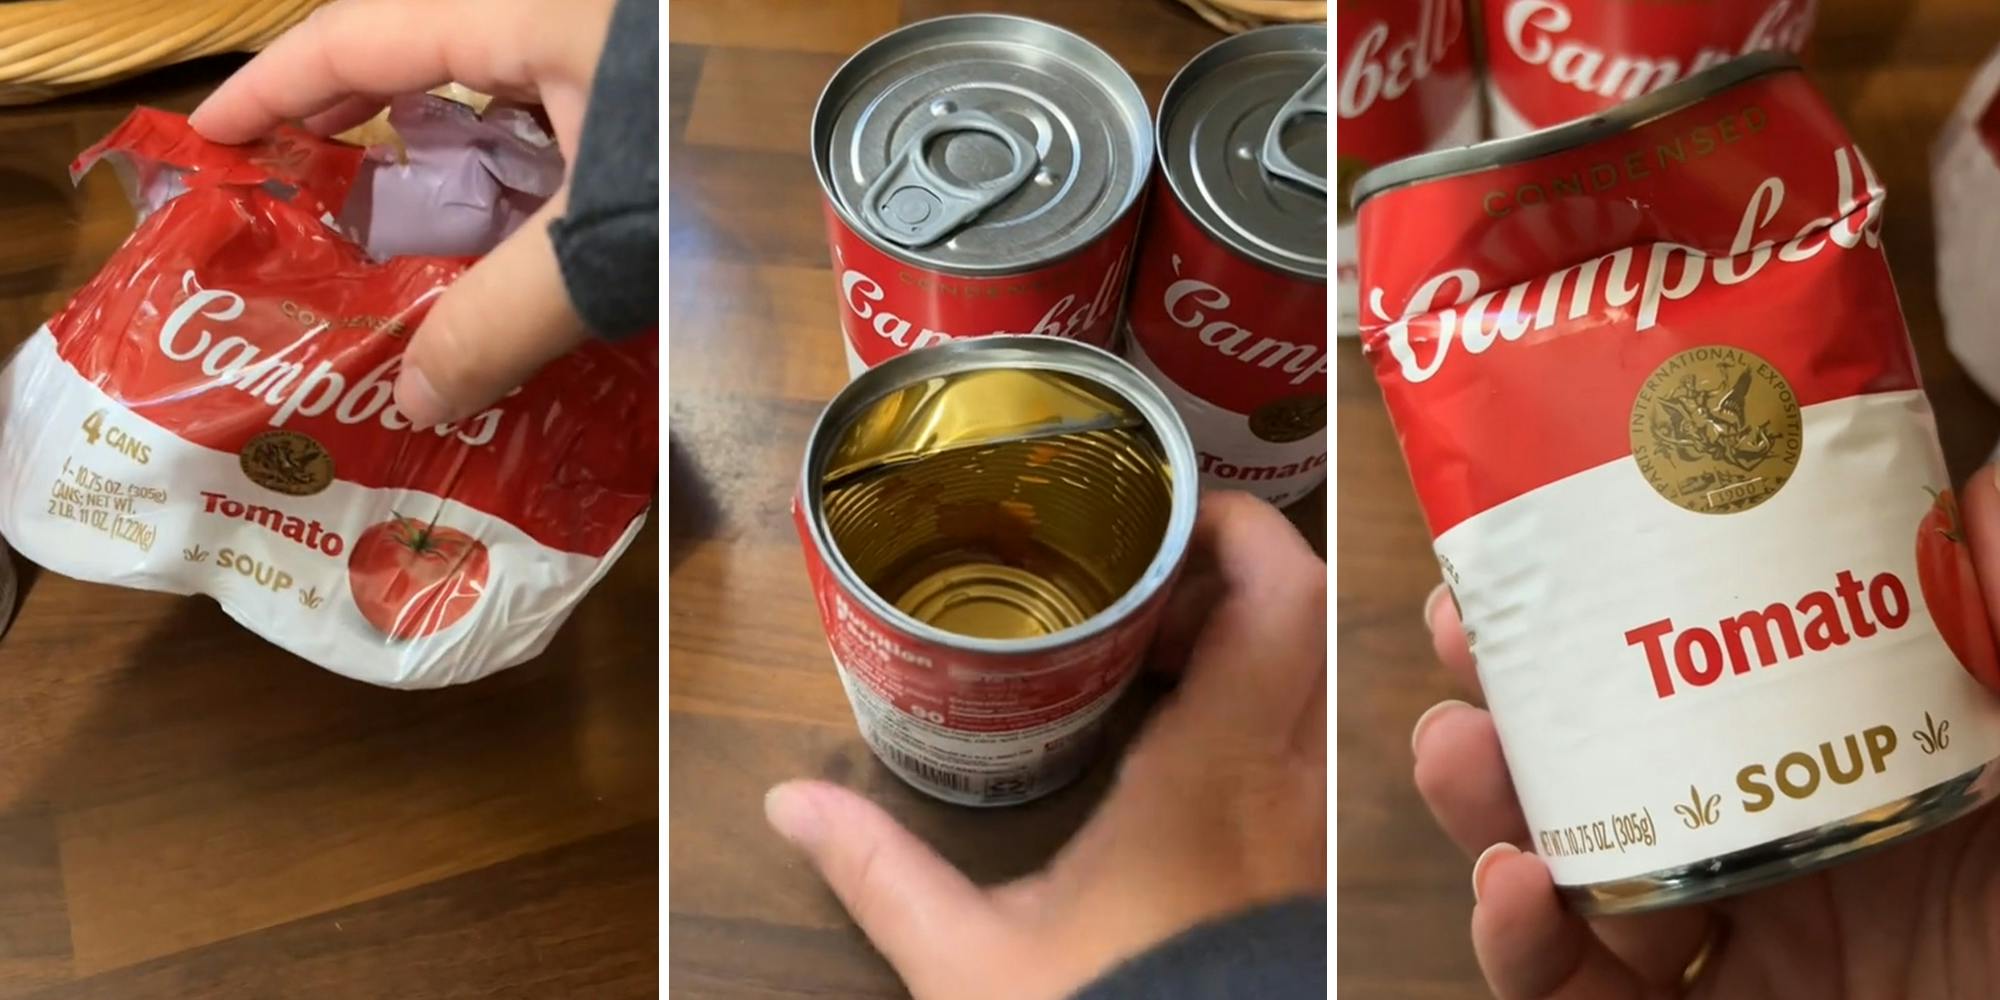 ‘I was always told it was safe’: Campbell’s Soup customer issues warning on why you shouldn’t eat food from dented cans